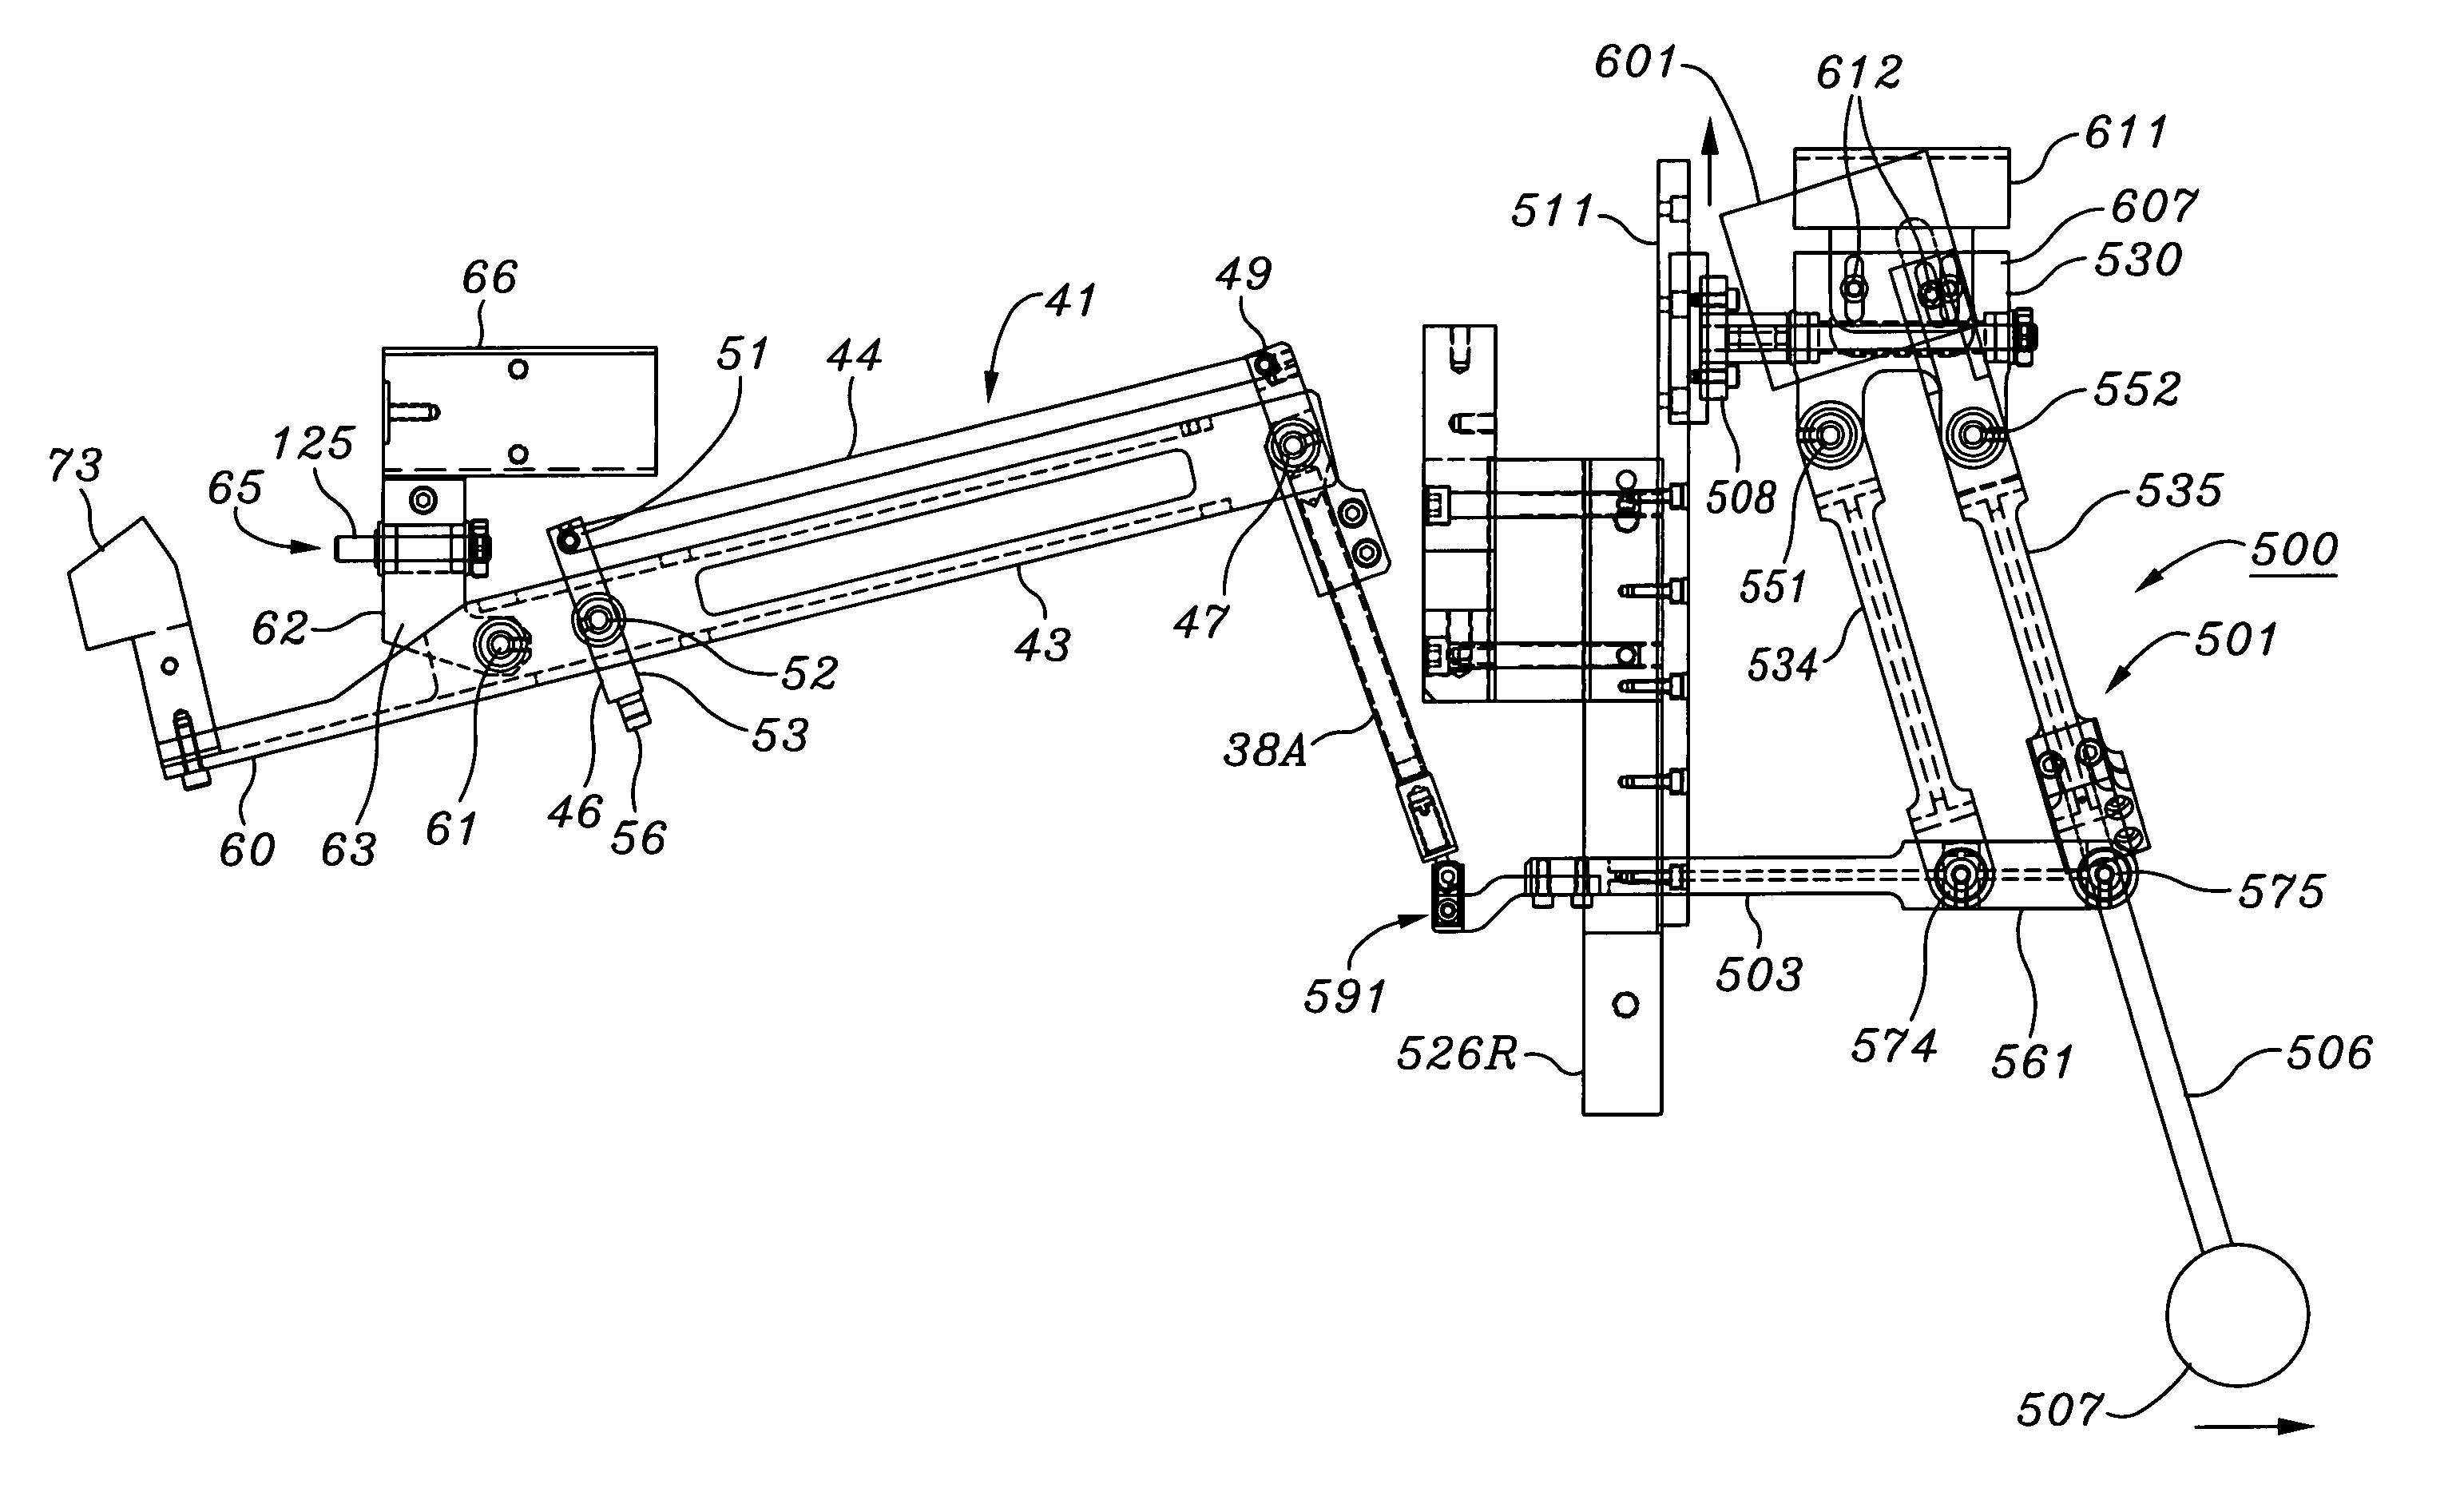 Auxiliary control apparatus for micro-manipulators used in ultrasonic bonding machines